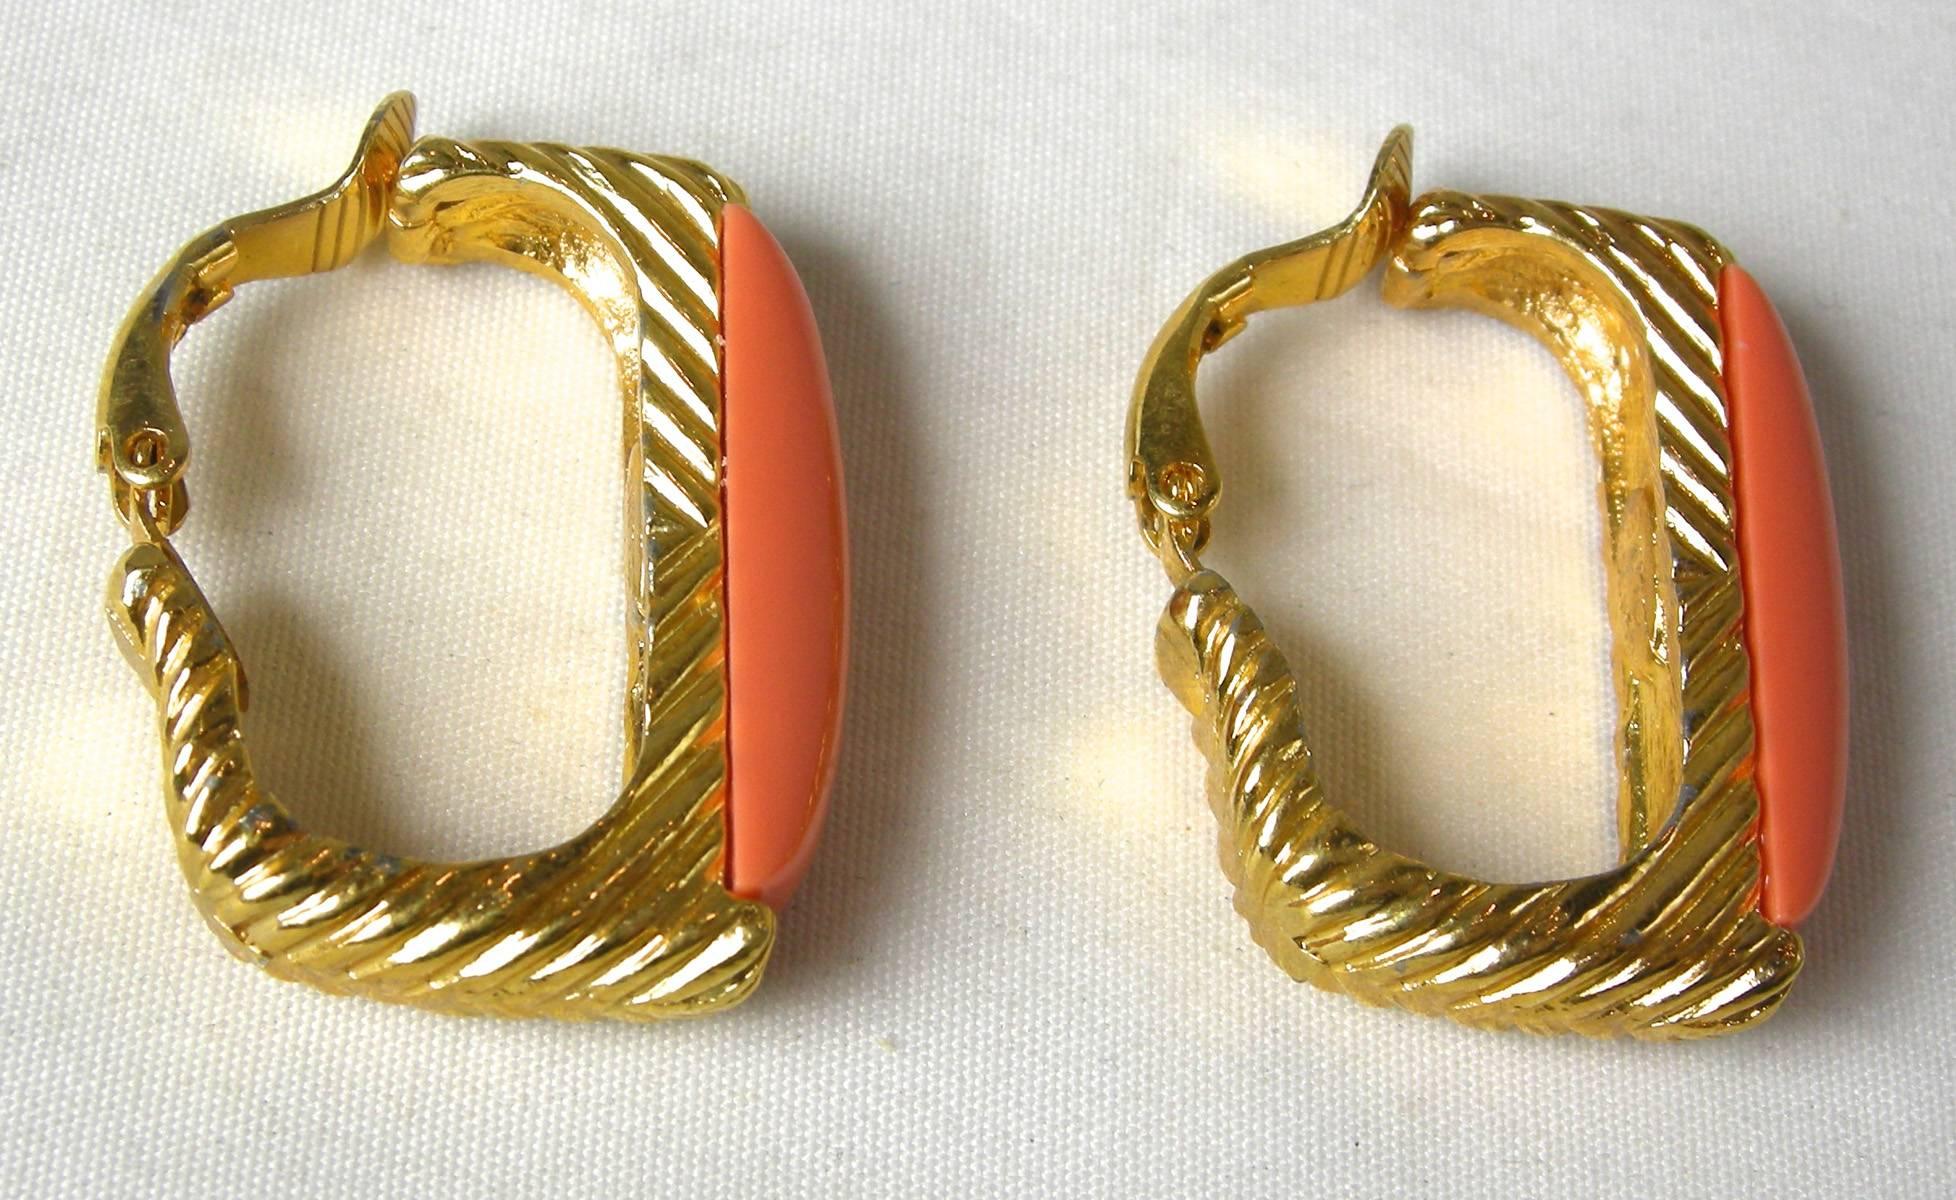 These Kenneth Jay Lane clip hoop earrings have a long faux coral front, which lies on a gold tone ribbed design.  It measures 1-1/4” long x 3/4” wide.  It is signed “Kenneth Lane” and is in excellent condition.